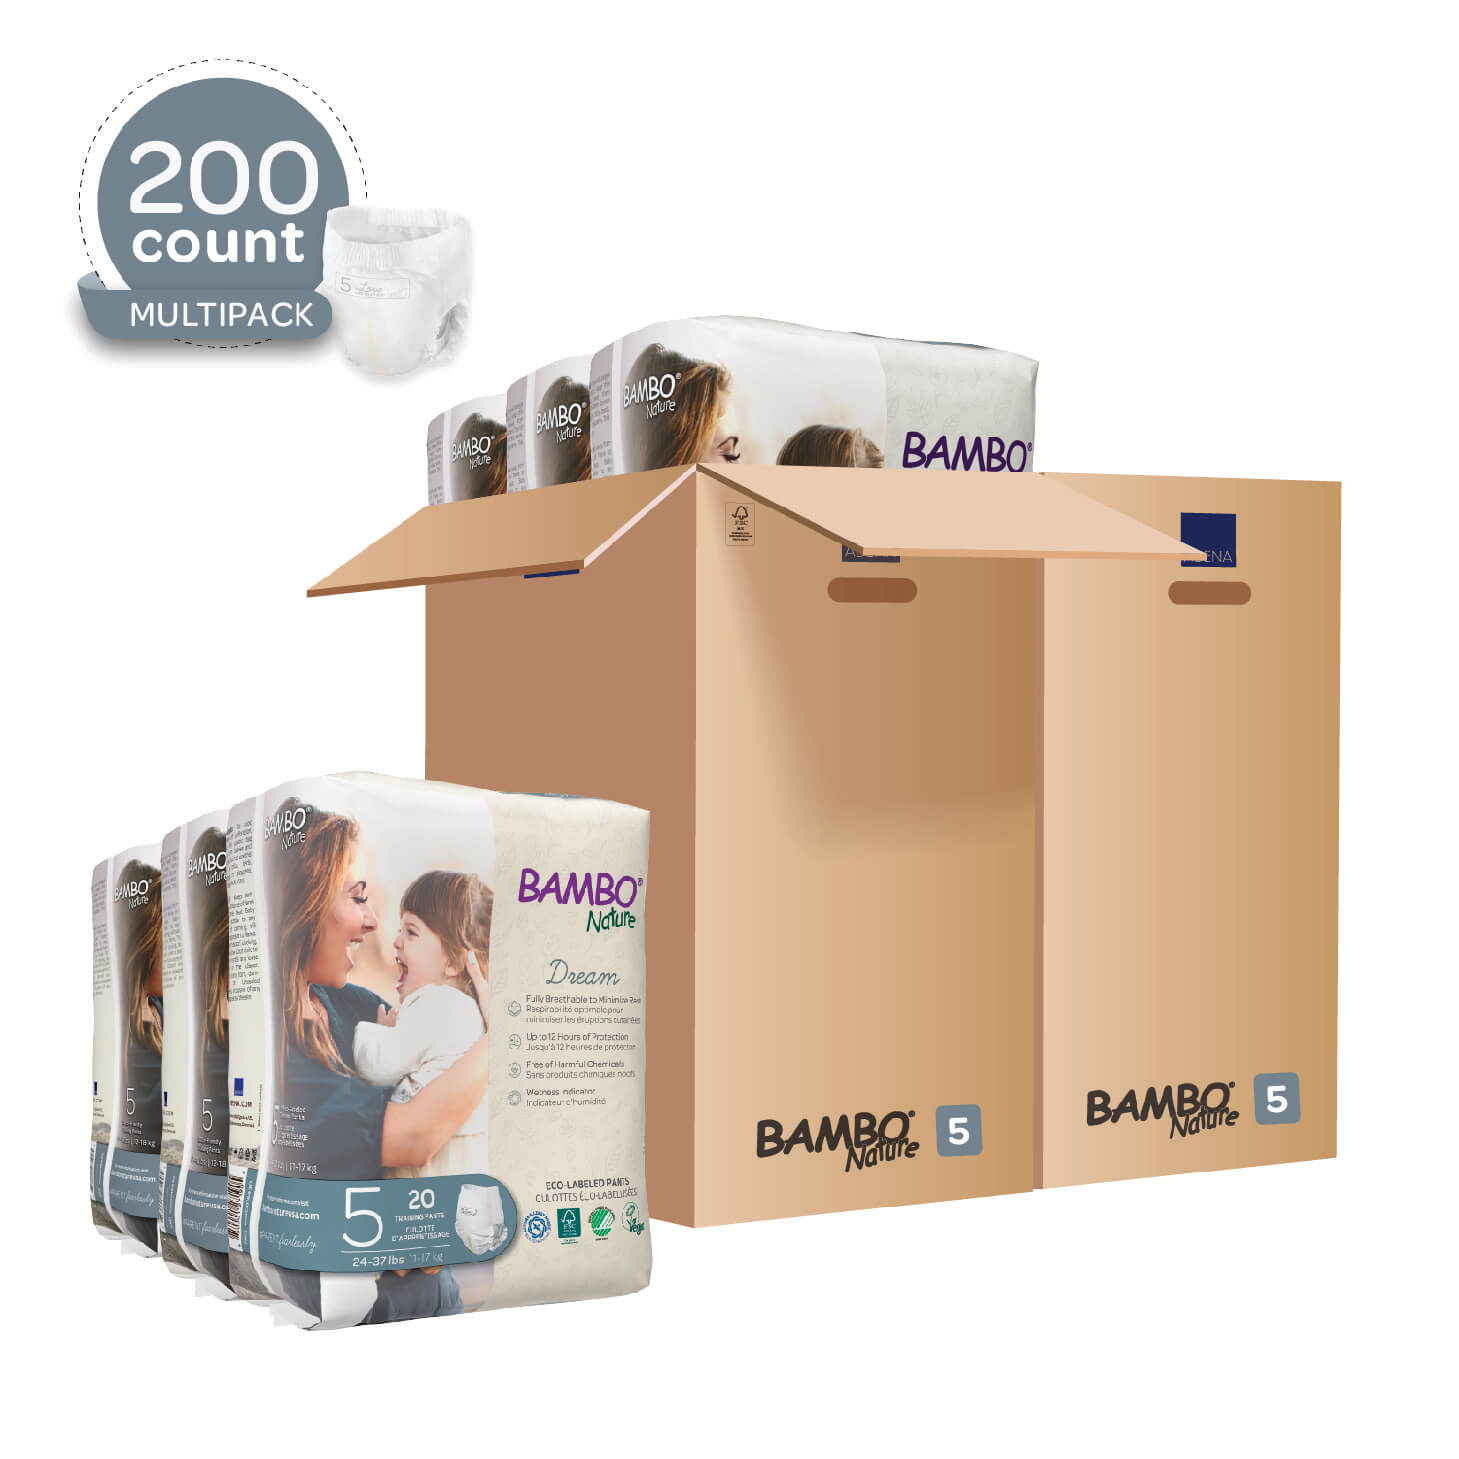 Buy BAMBO NATURE LARGE SIZE TRAINING PANTS WITH WETNESS INDICATOR - 20  DIAPERS Online & Get Upto 60% OFF at PharmEasy